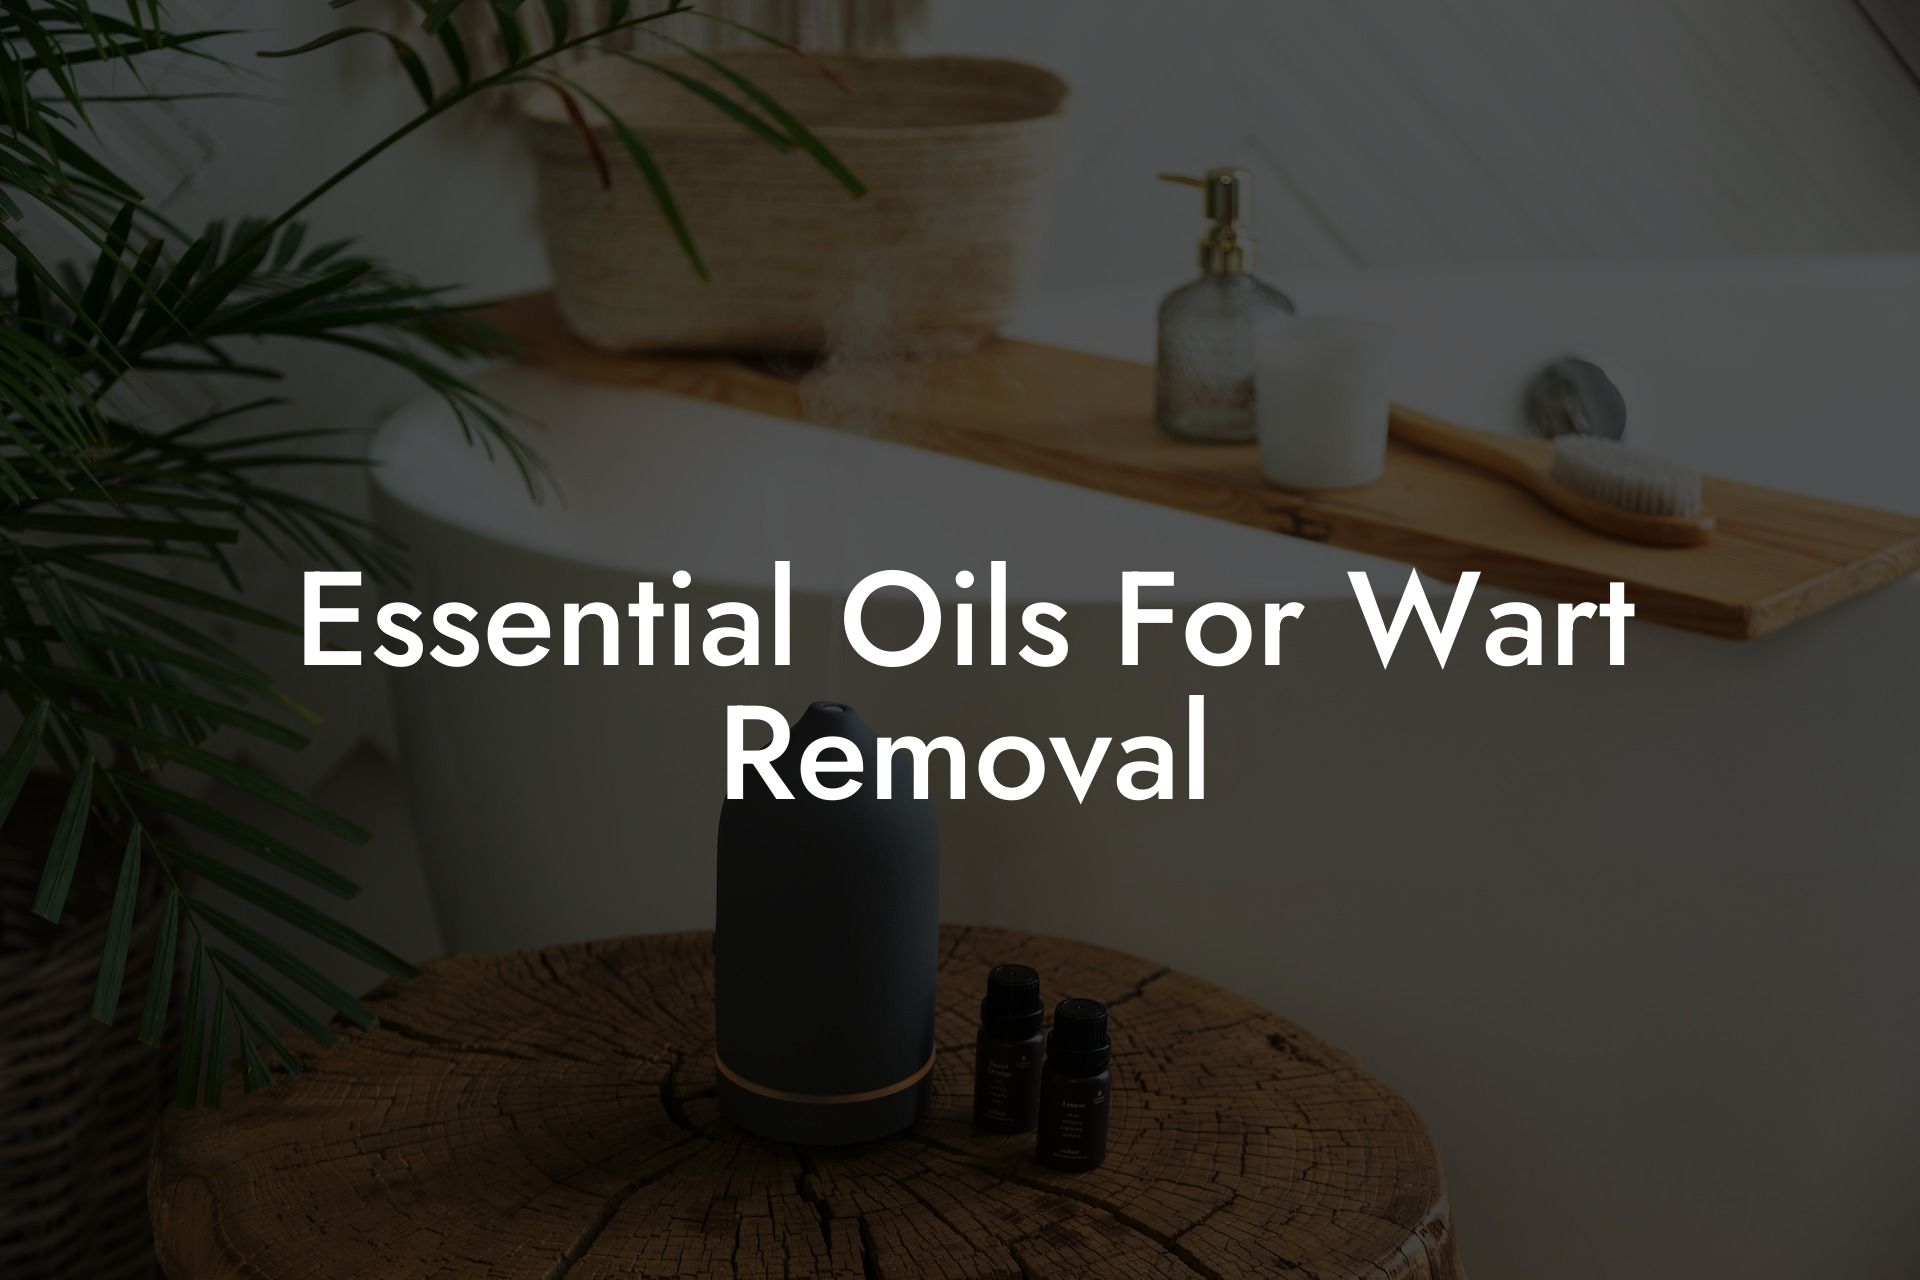 Essential Oils For Wart Removal